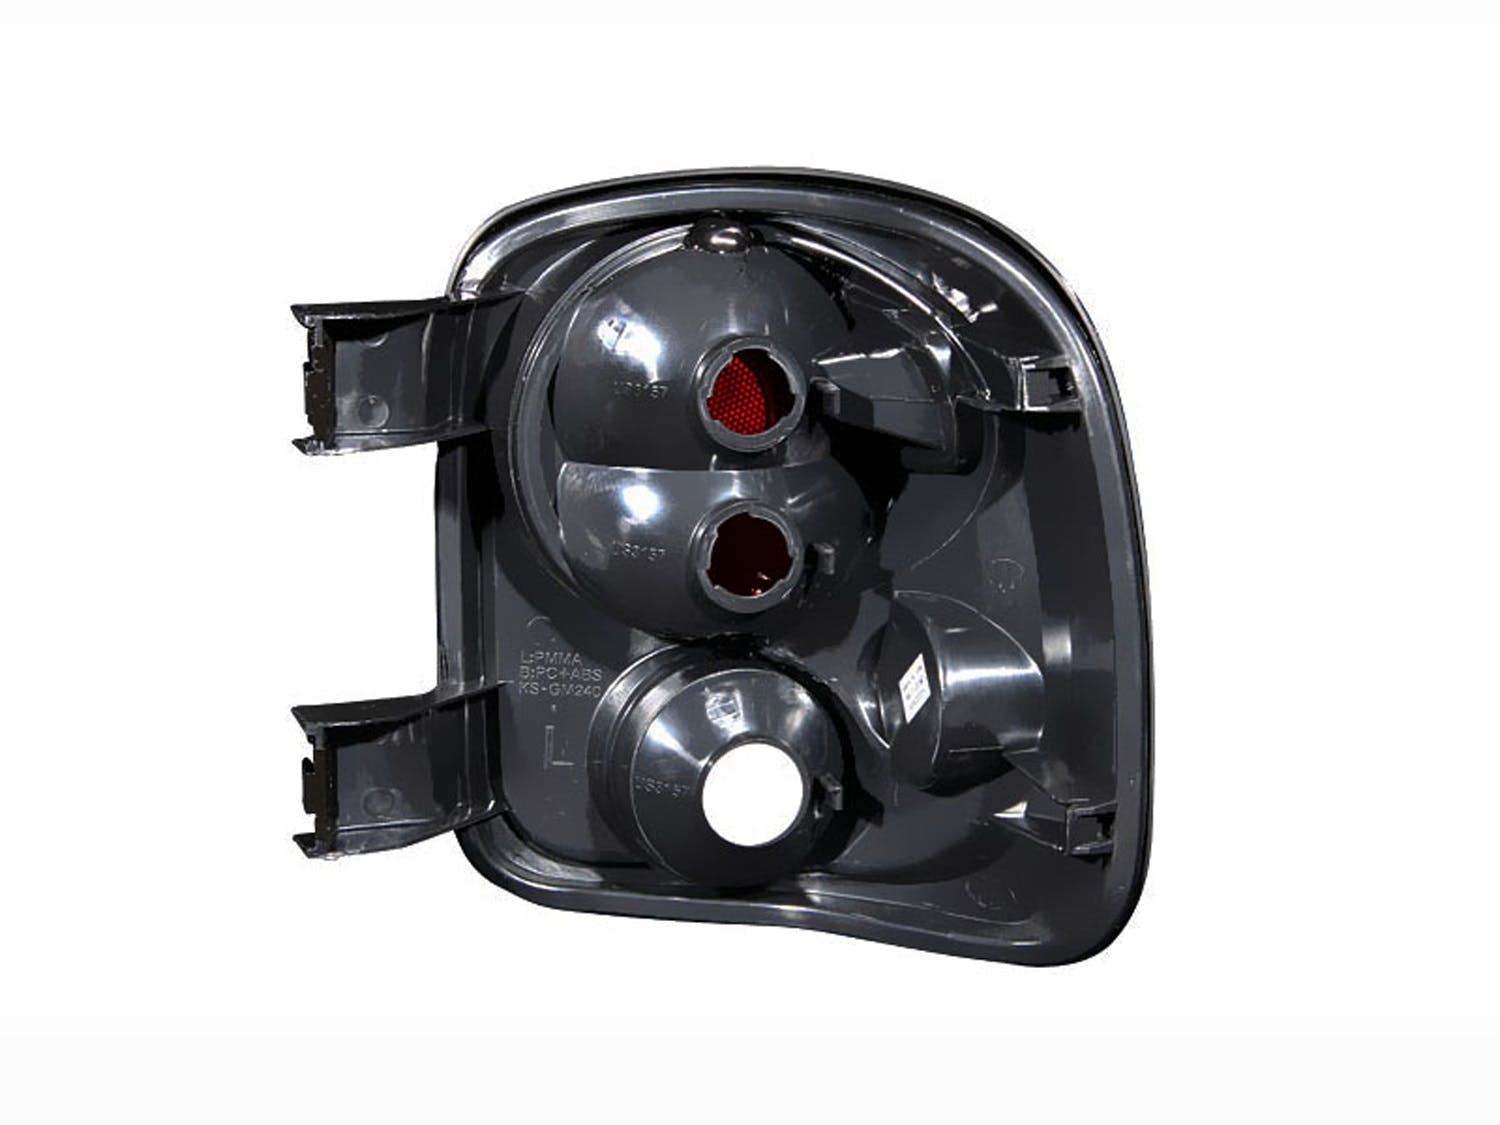 AnzoUSA 211028 Taillights Black